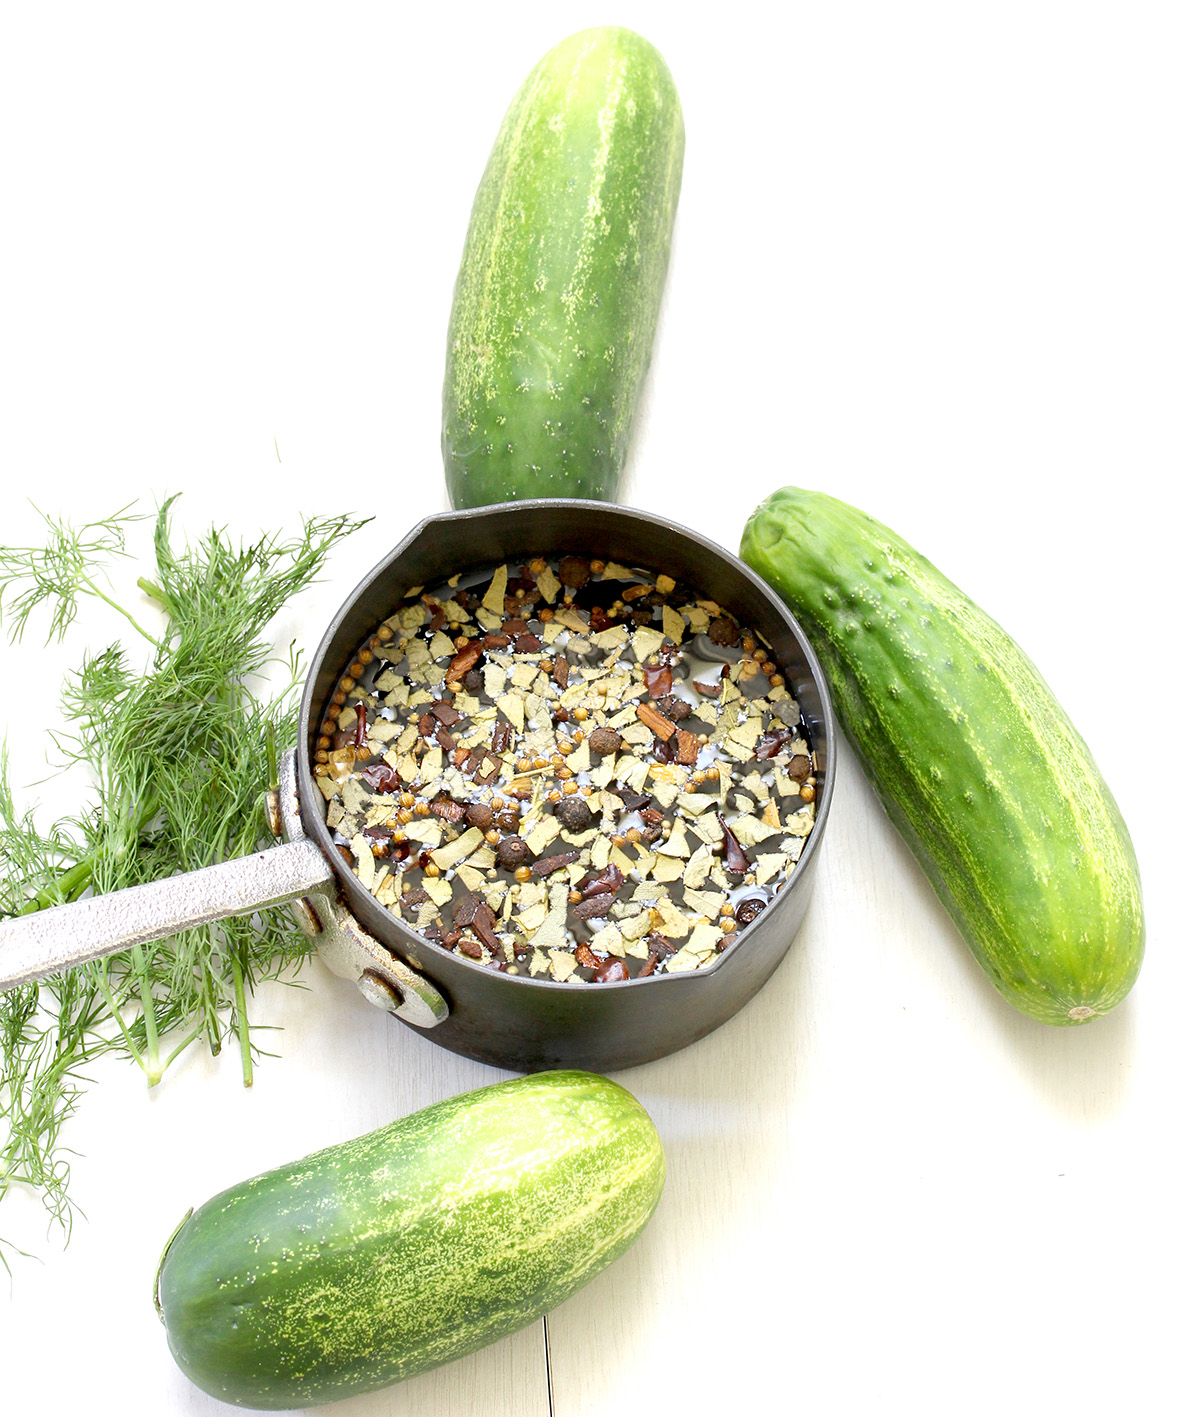 Recipe for making low sodium dill pickles